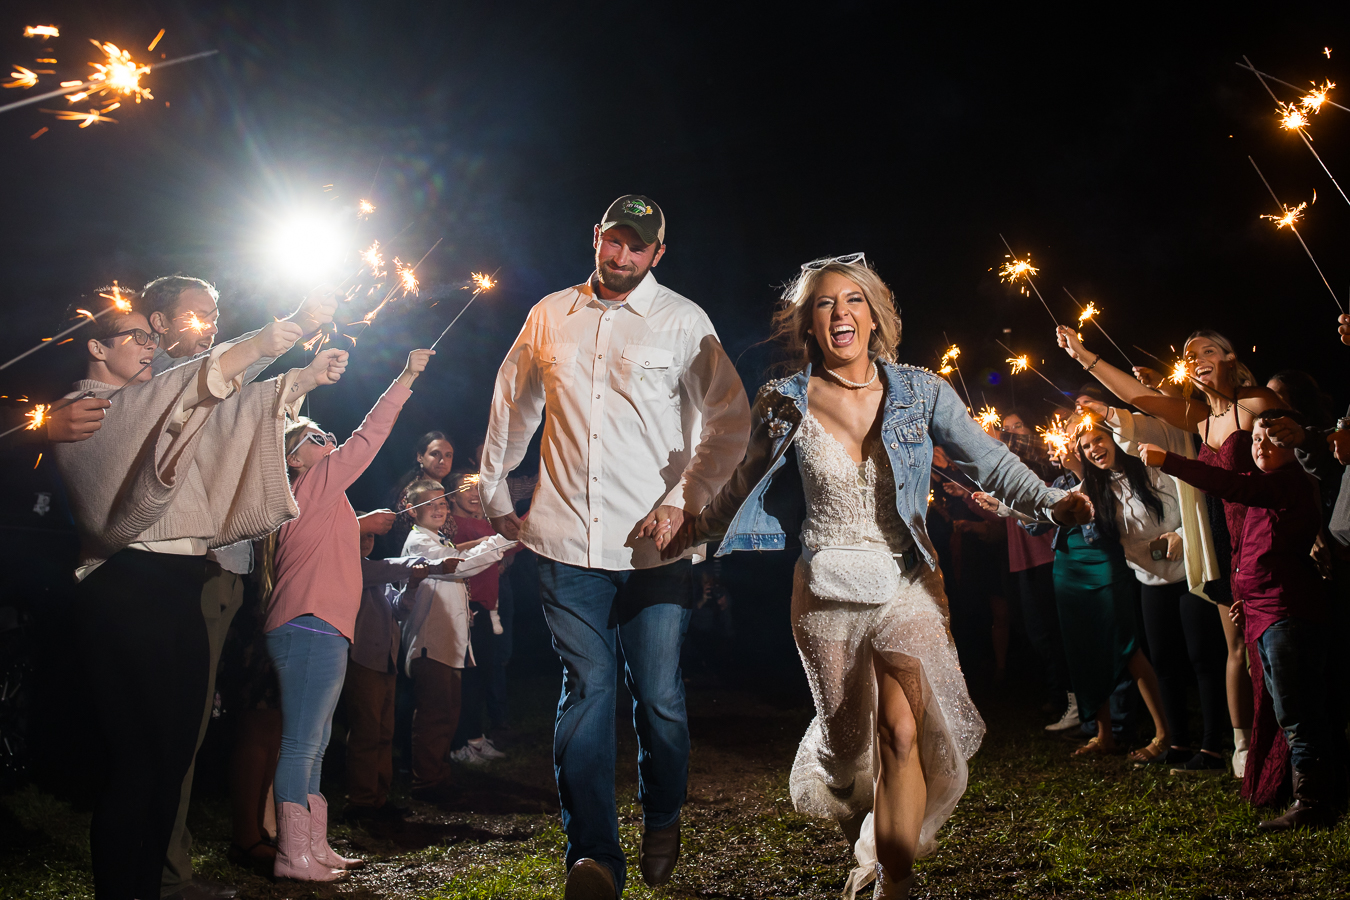 wild country wedding photographer, lisa rhinehart, captures this fun image of the bride and groom as they run through the middle of their guests holding sparklers during this country wedding sparkler send off in halifax pa 